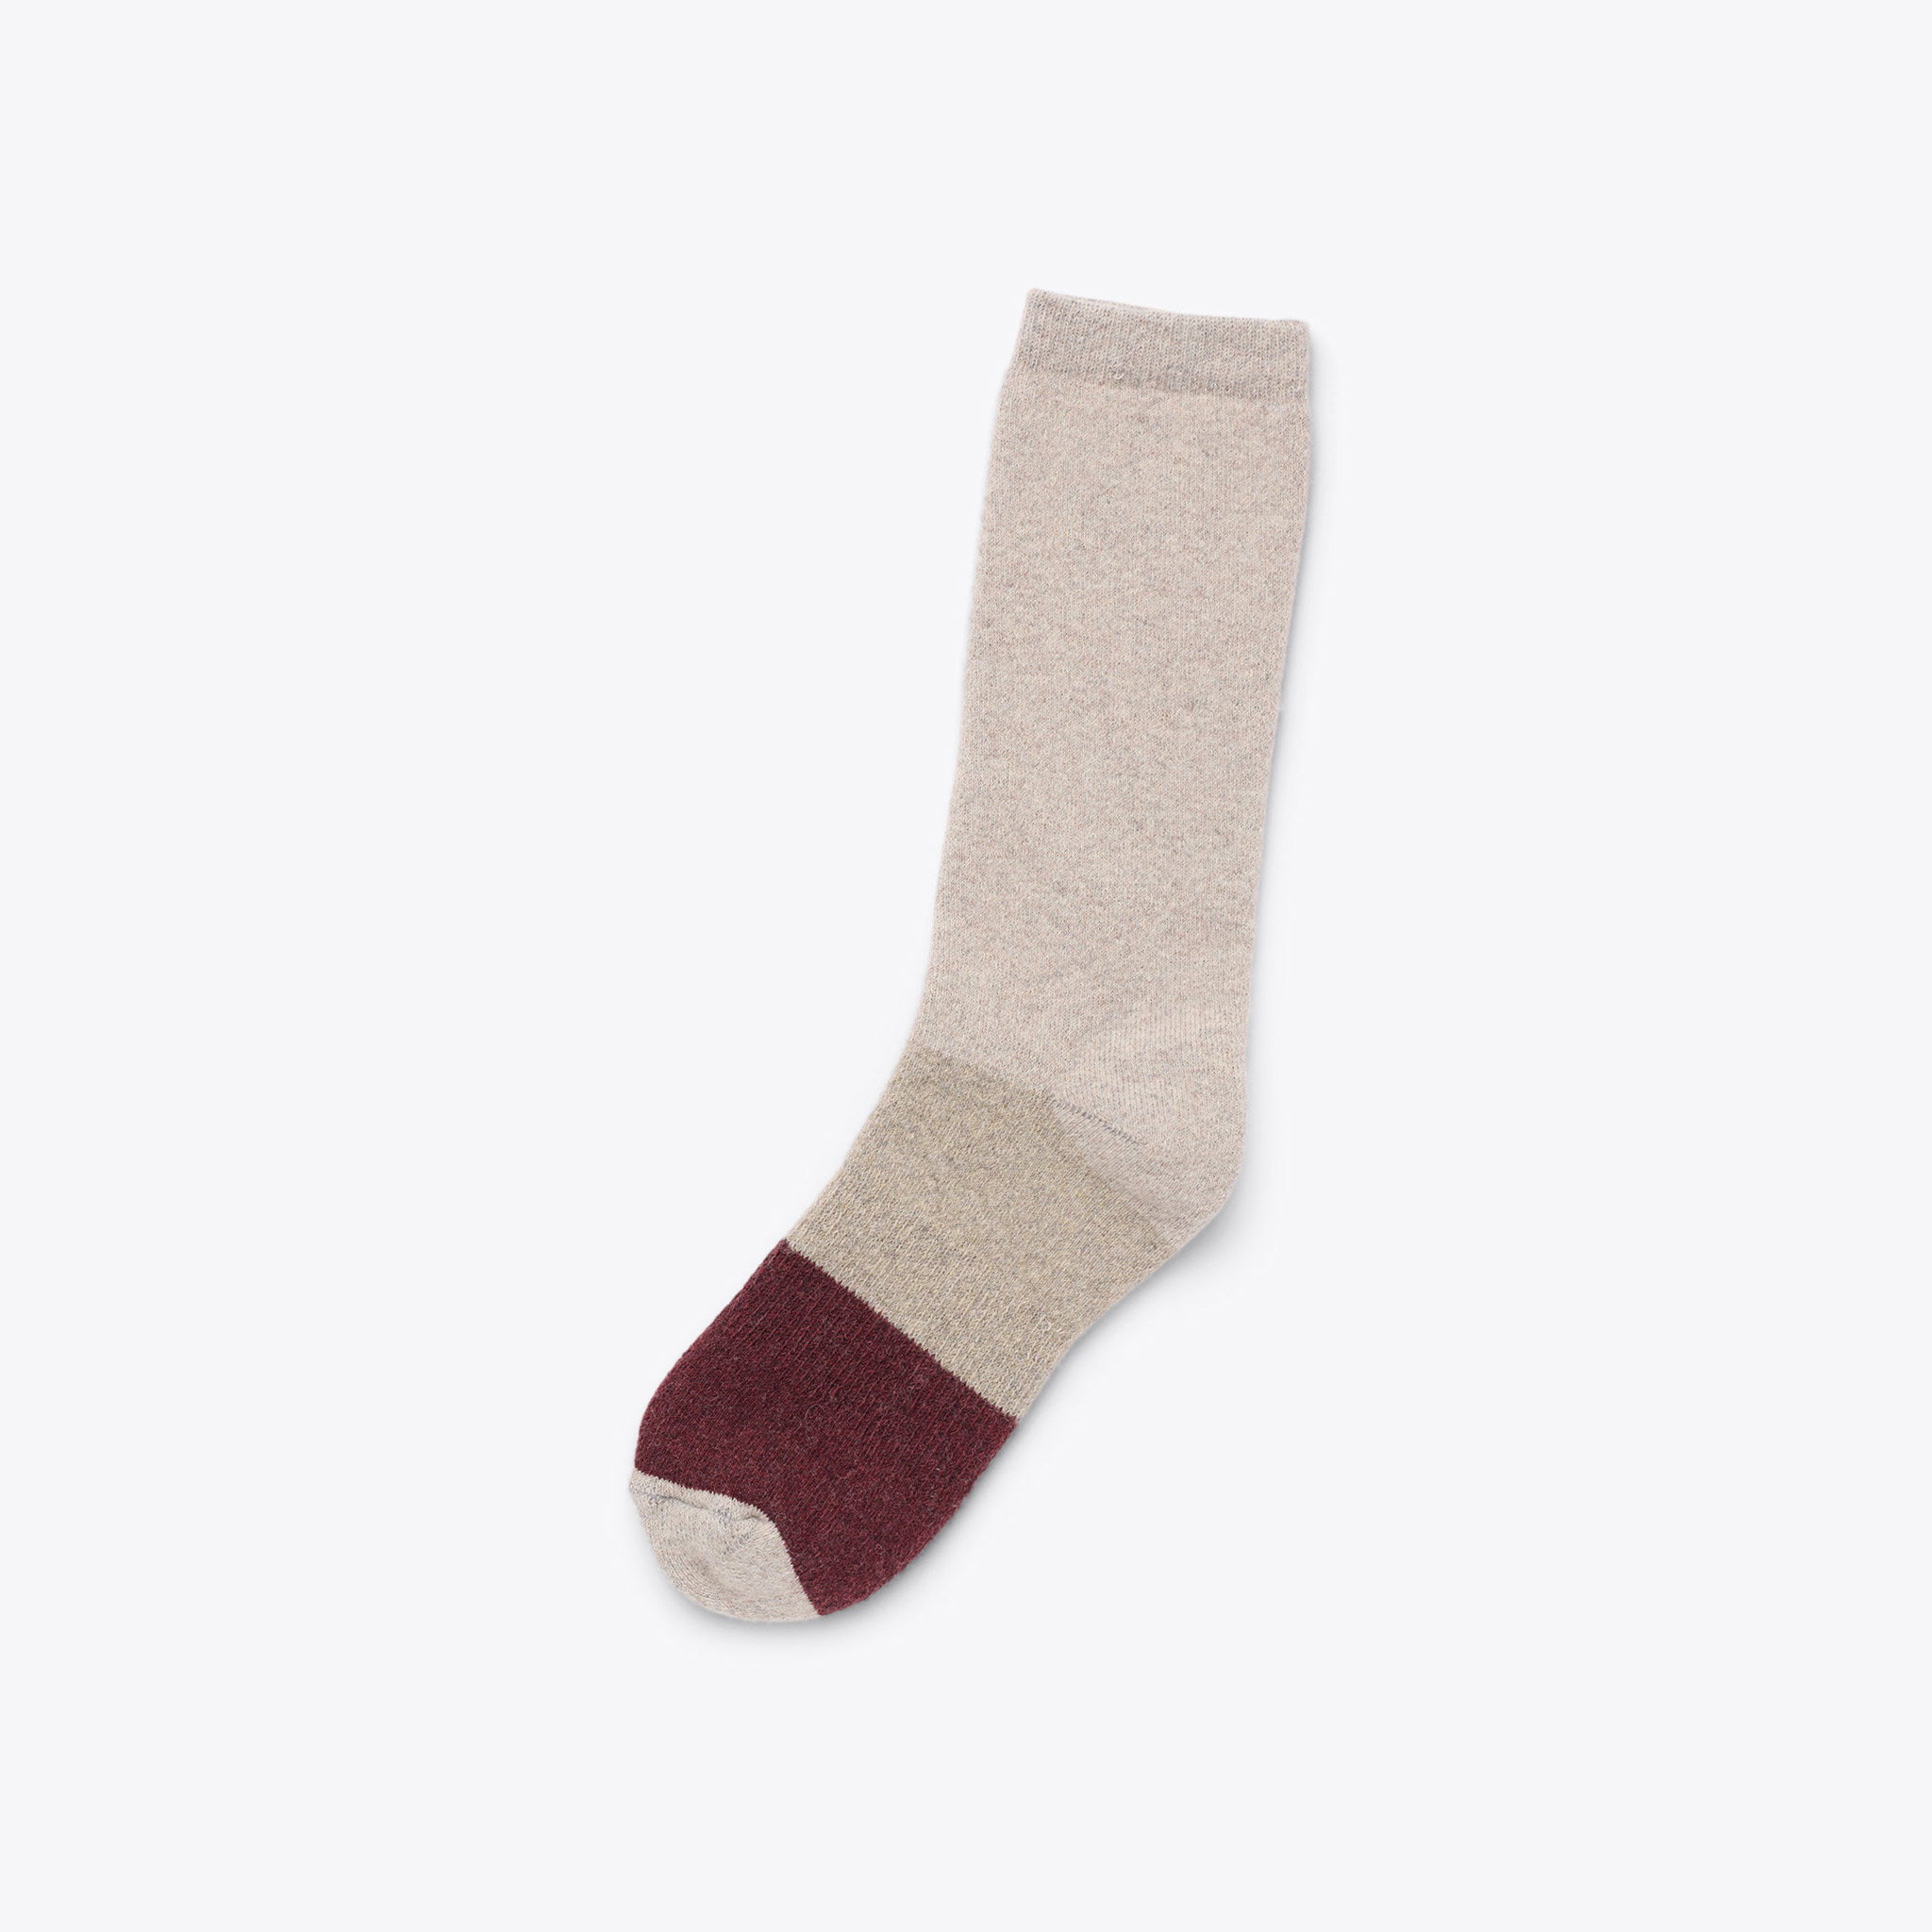 Nisolo Wool Cushion Crew Hiker Sock Khaki/Burgundy - Every Nisolo product is built on the foundation of comfort, function, and design. 